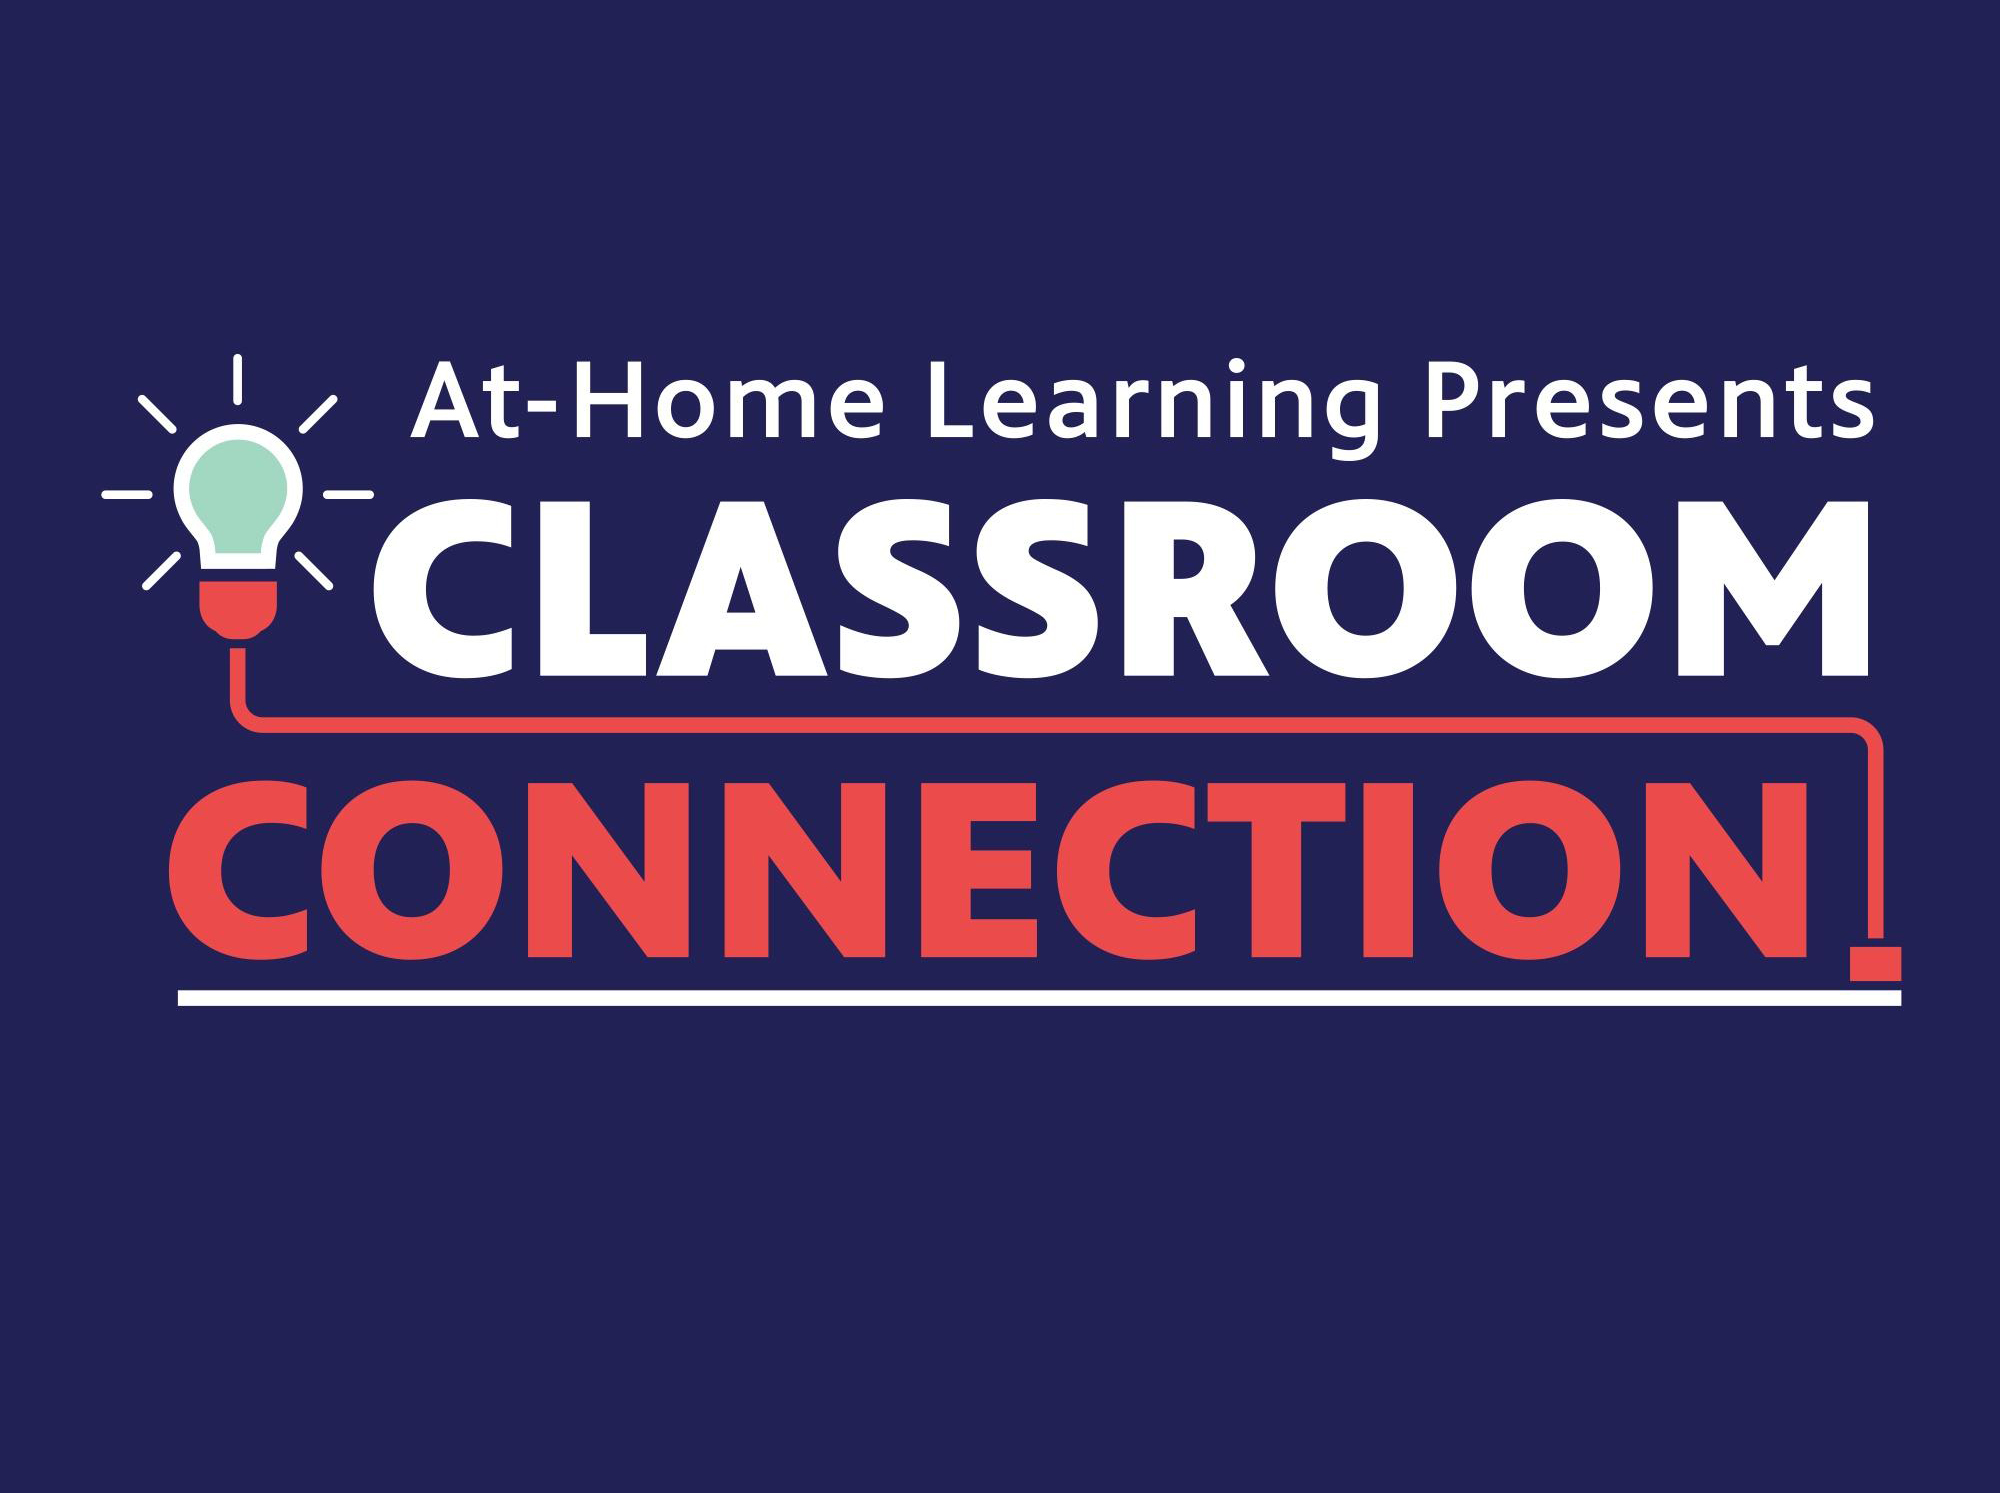 A blue background with white and read text saying "At-Home Learning Presents Classroom Connection".